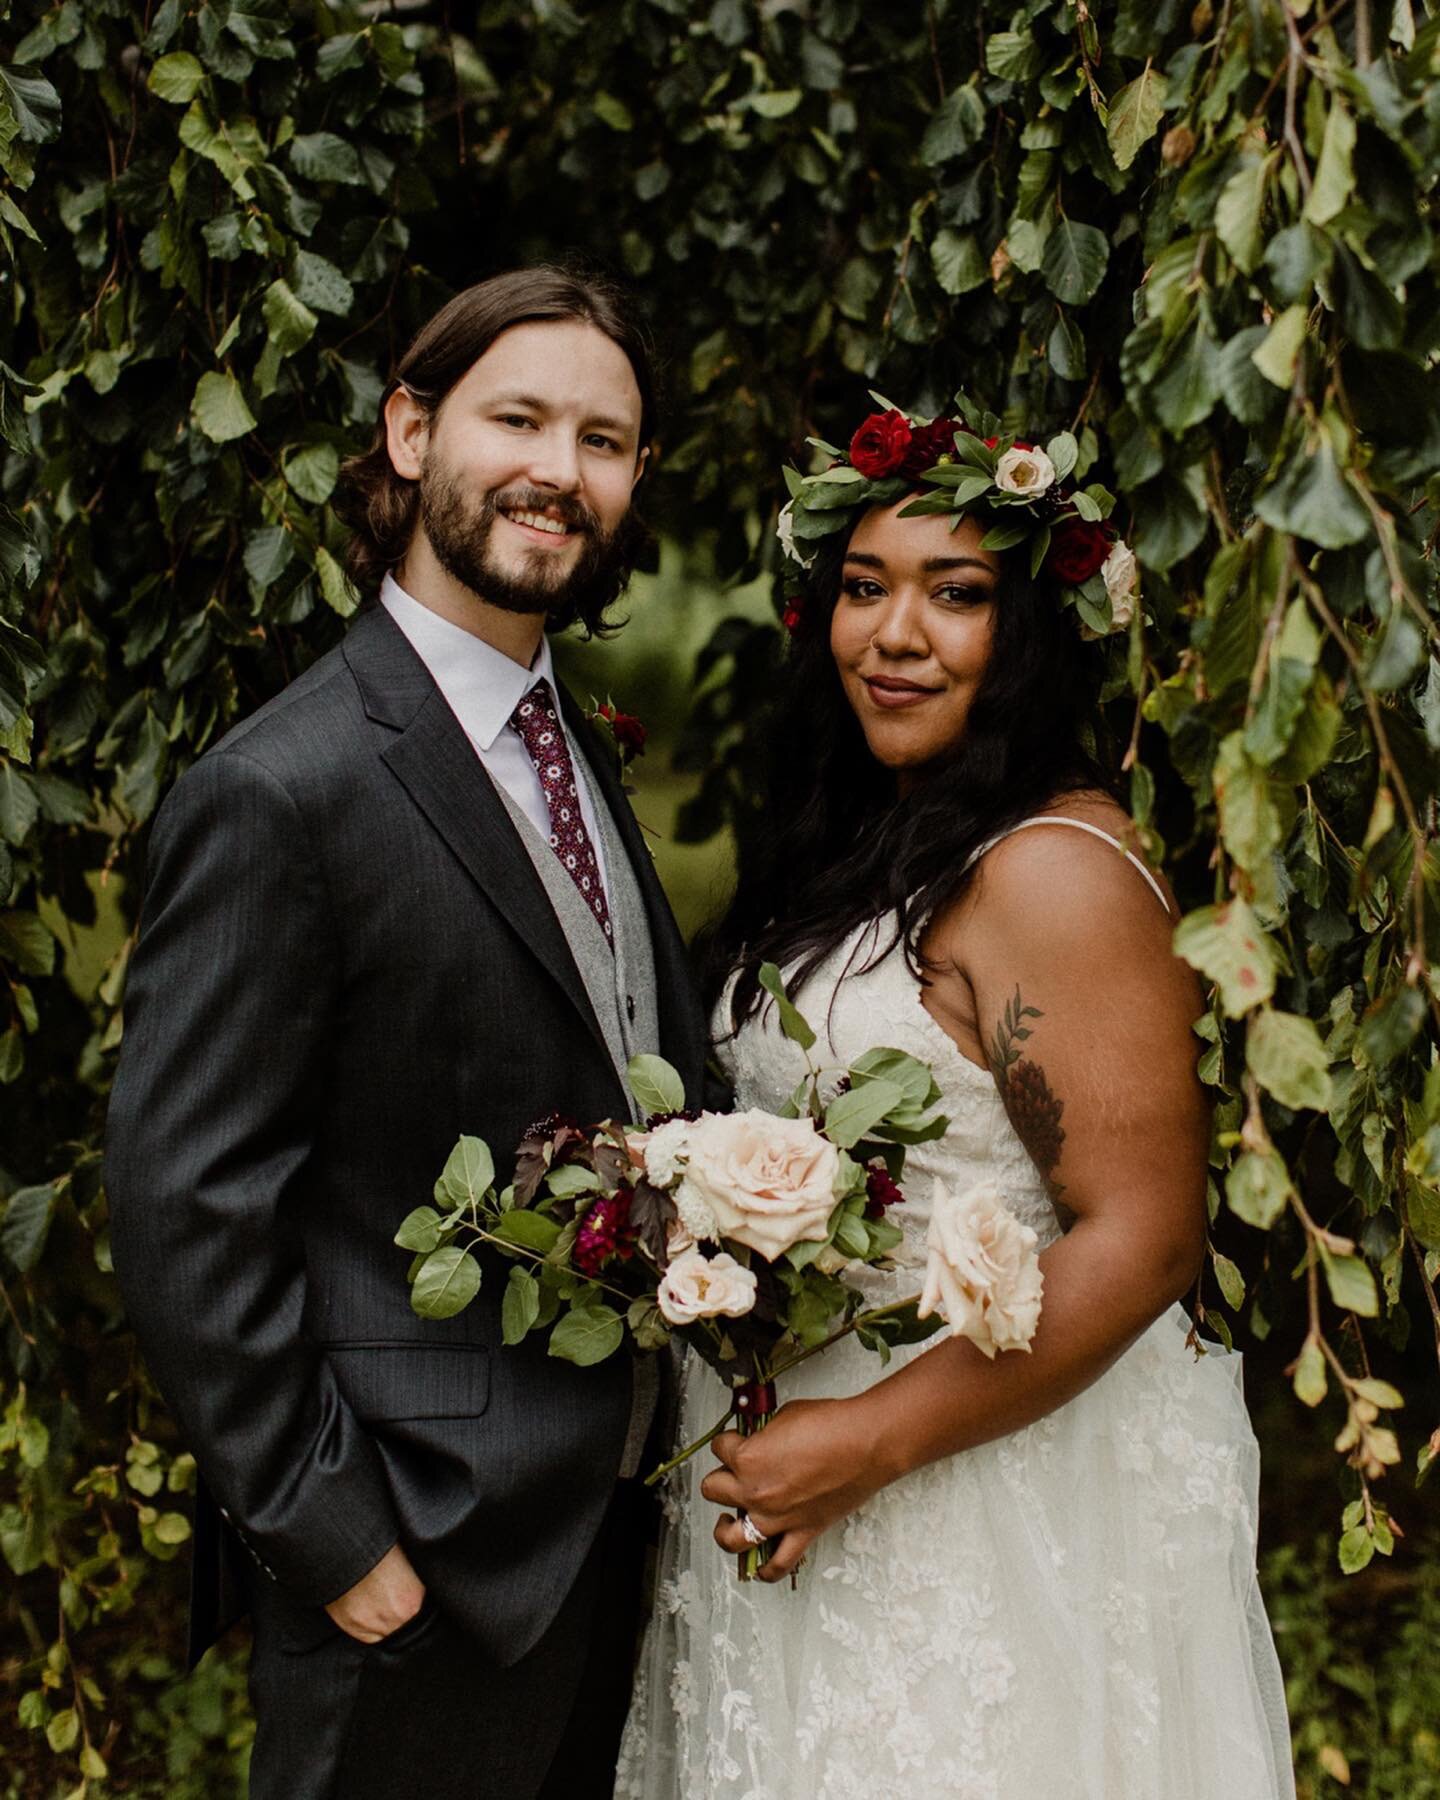 Hailey + Ron were thrown a few curveballs when planning their wedding - originally in 2020, they rescheduled to summer of 2021 and went from large venue to an intimate wedding at home. They opted to transform their new/old home into their venue and I